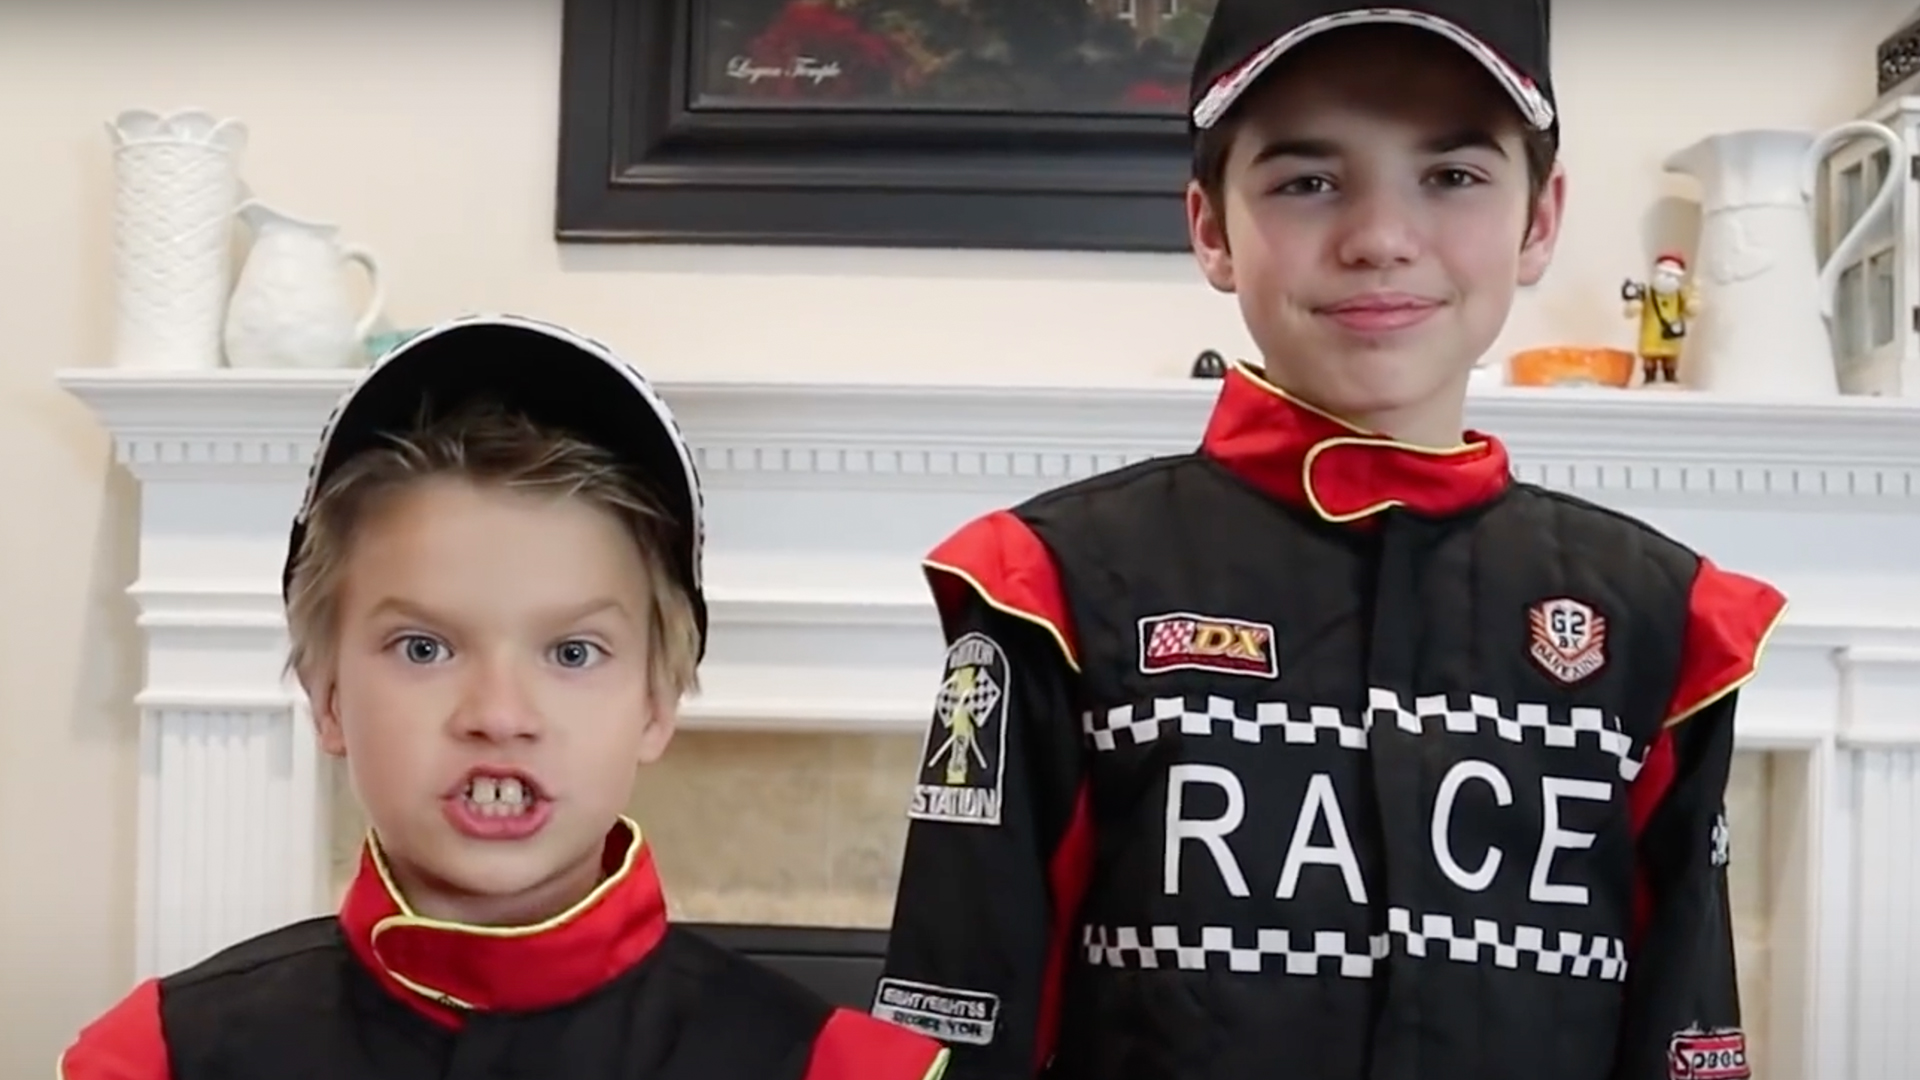 Jake and Ty dressed as racing drivers